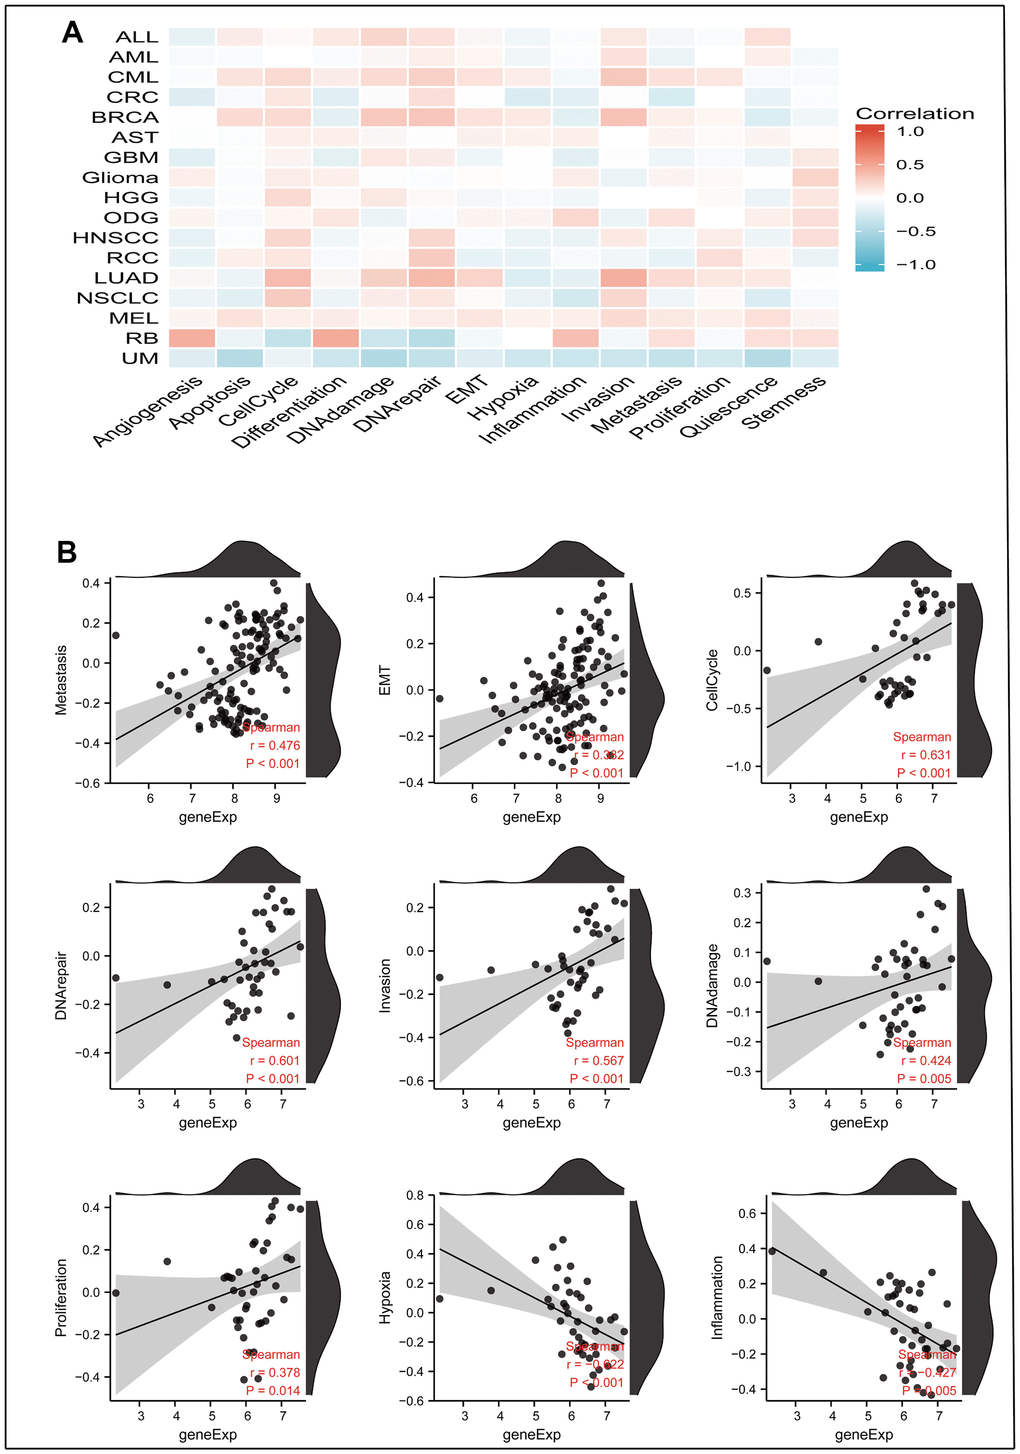 The correlation between MRPL13 expression and 14 cancer functional states using single-cell sequence data from the Cancer-SEA database. (A) The correlation between MRPL13 expression and 14 cancer functional states in pan-cancer. (B) The expression of MRPL13 is positively correlated to Metastasis, Cell-Cycle, DNA-repair, Invasion, DNA-damage, Proliferation of LUAD. The expression of CENPL is negatively correlated to the Hypoxia, Inflammation of LUAD.